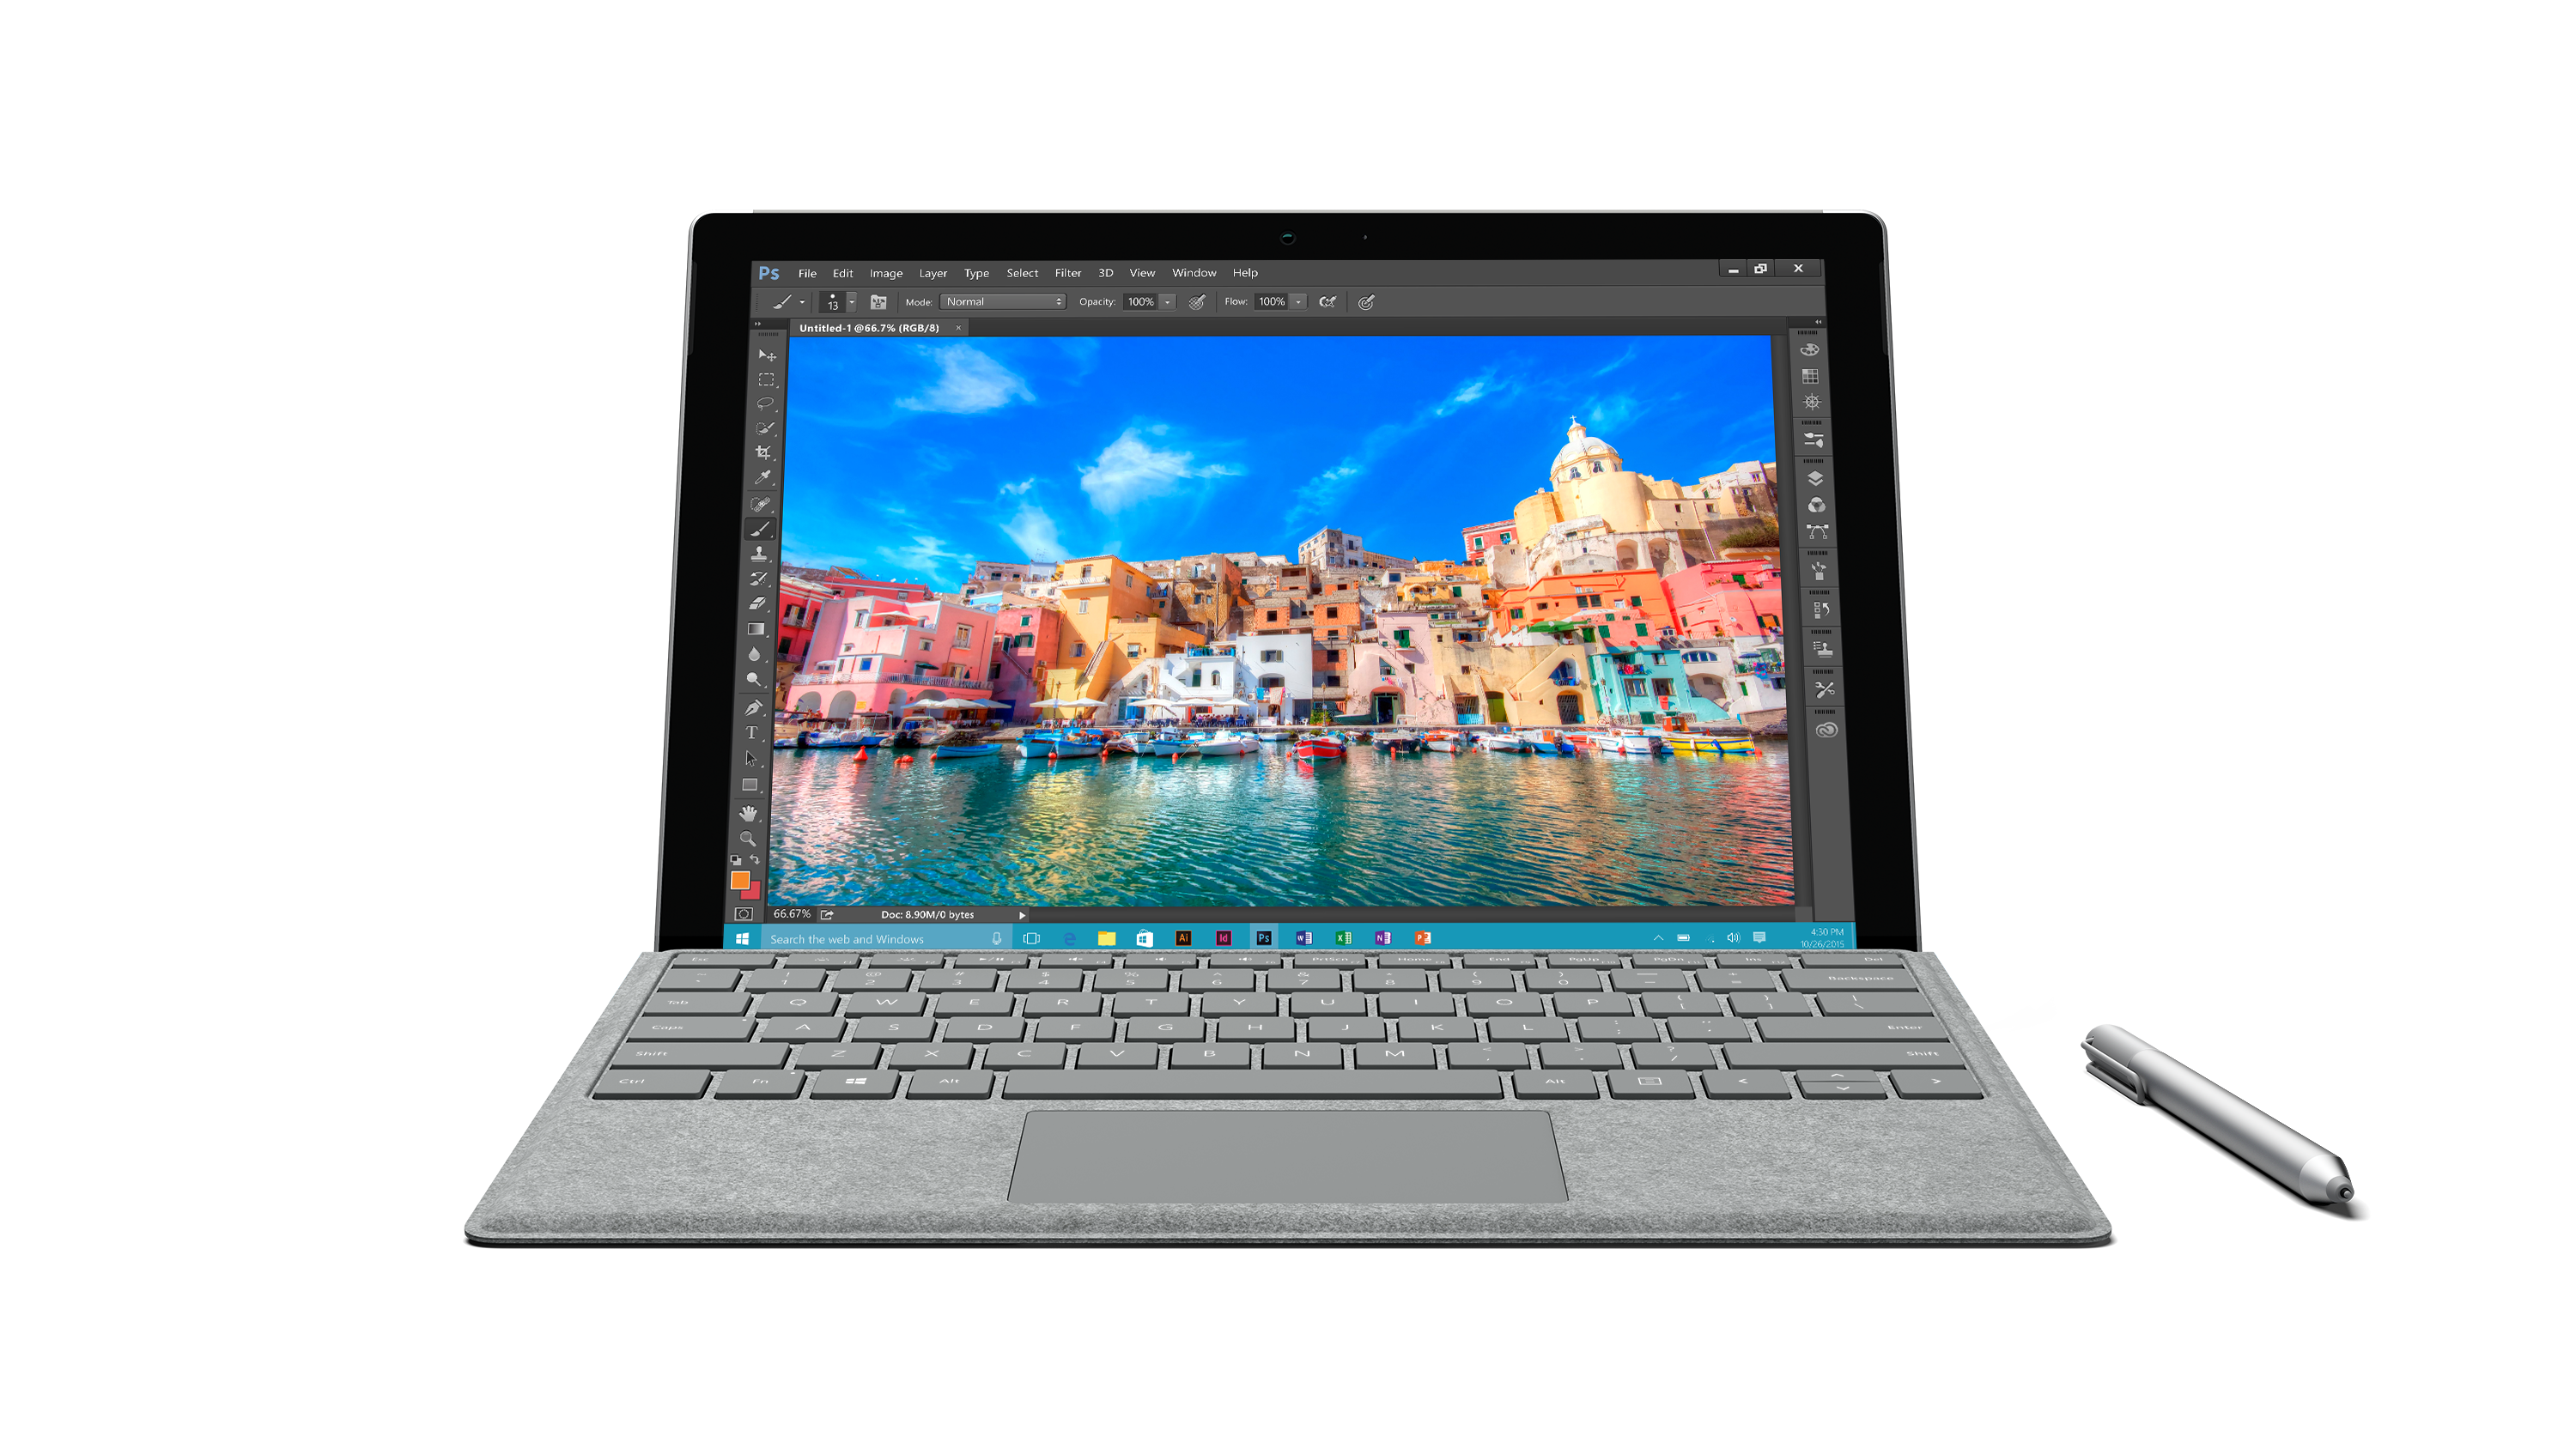 Introducing the Signature Edition Type Cover, the latest addition to the Surface Pro line